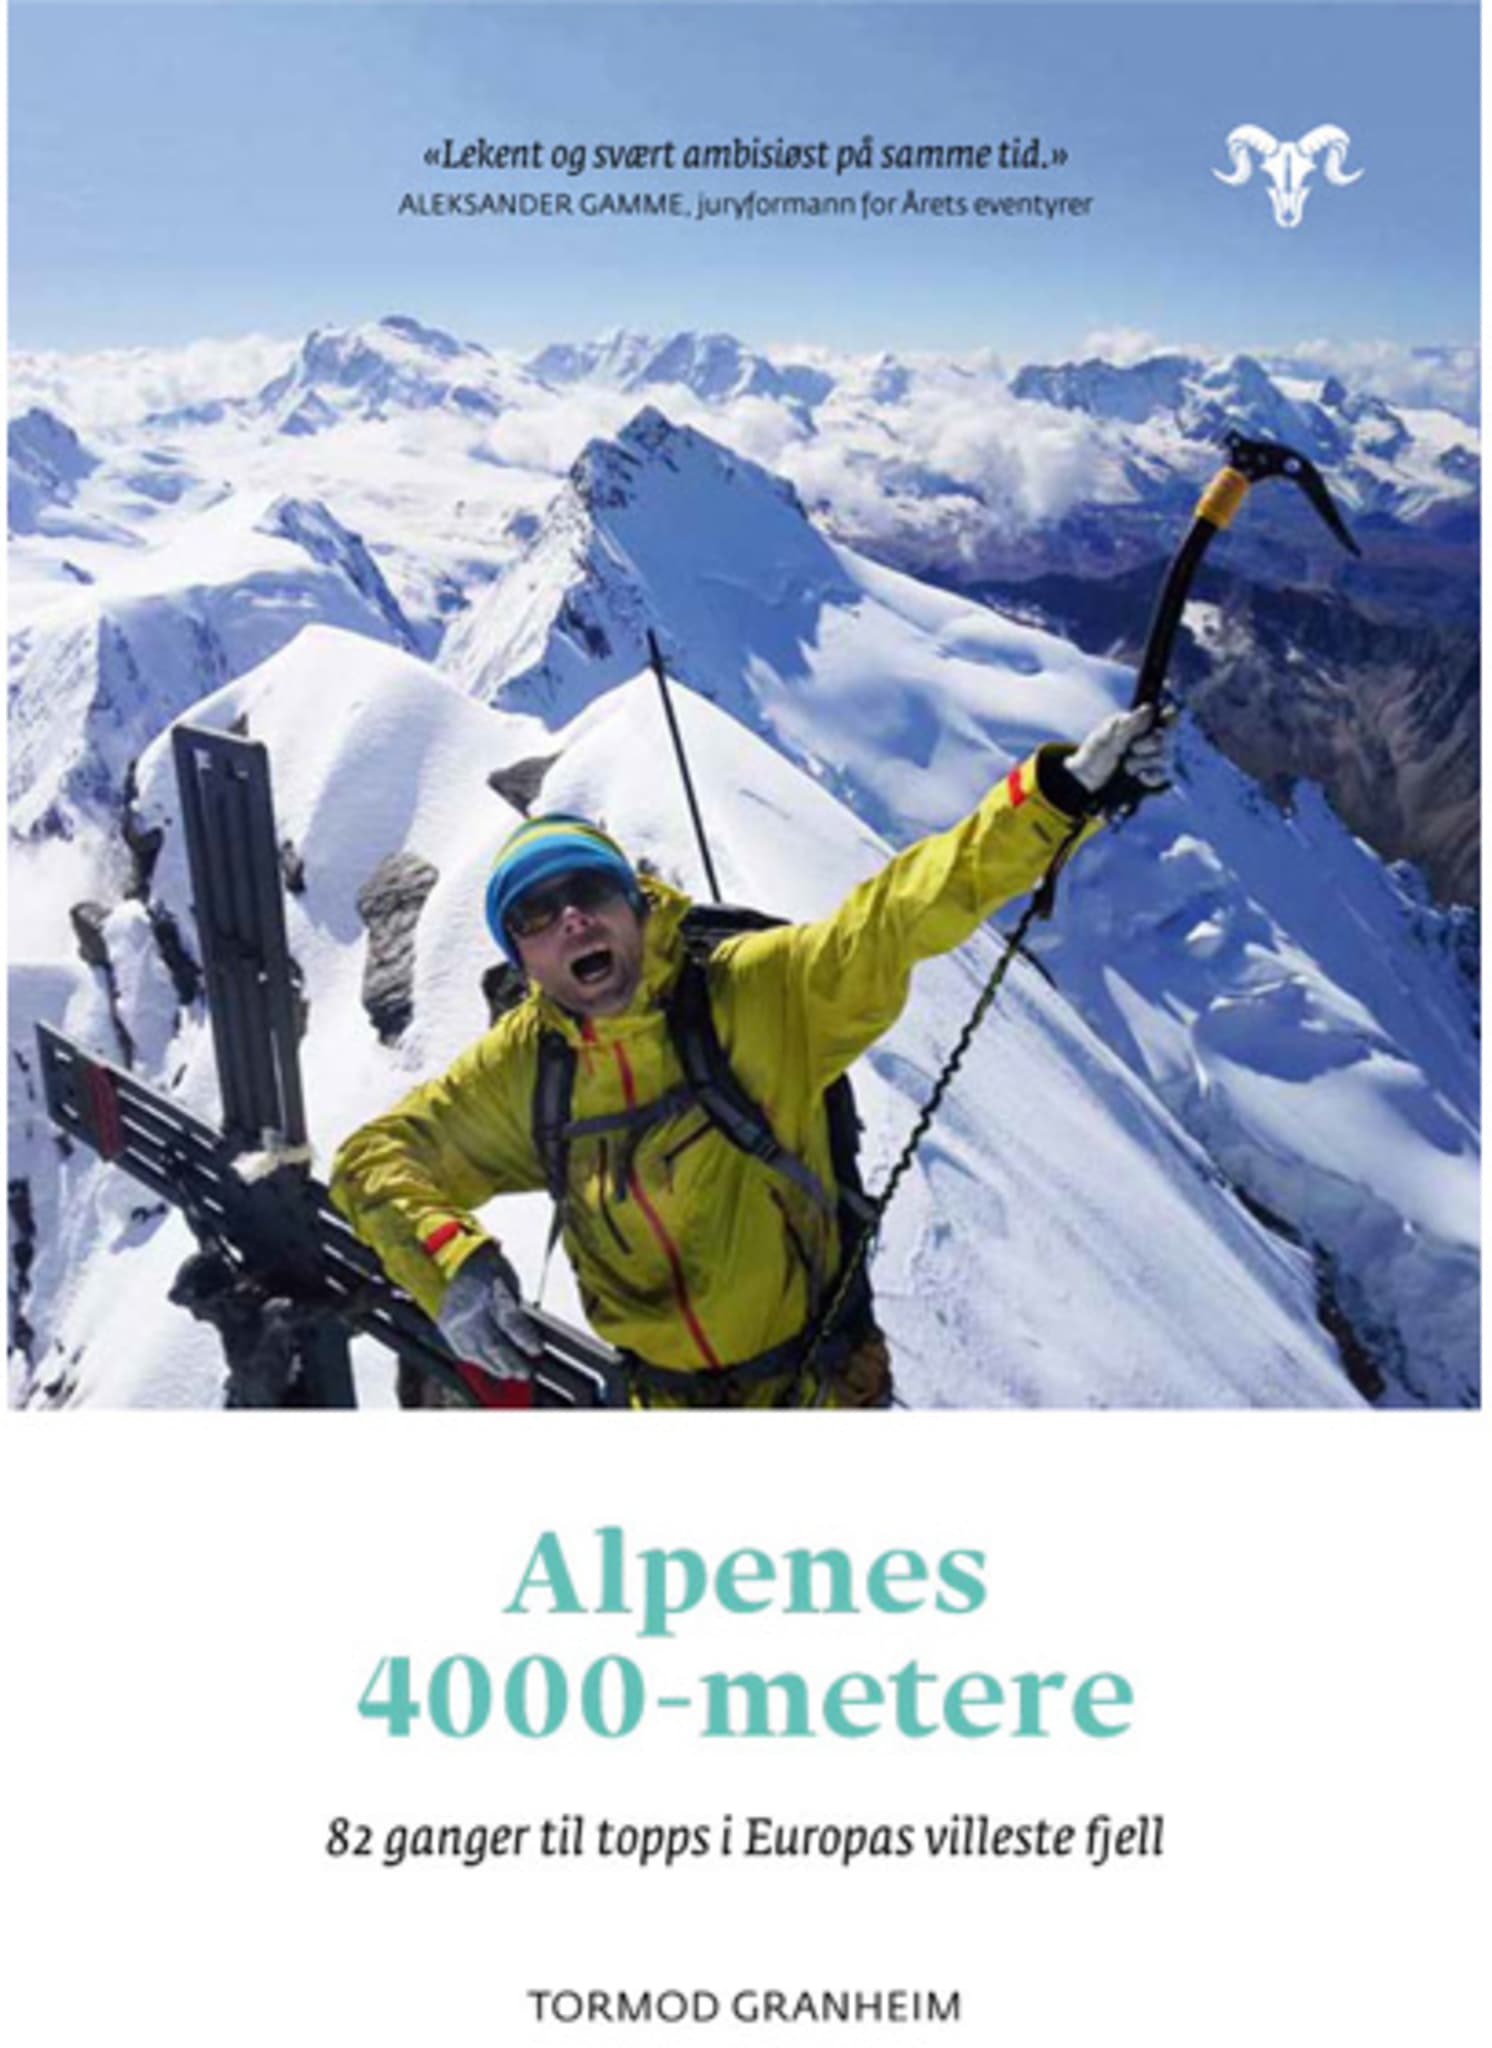 82 topper over 4000 m